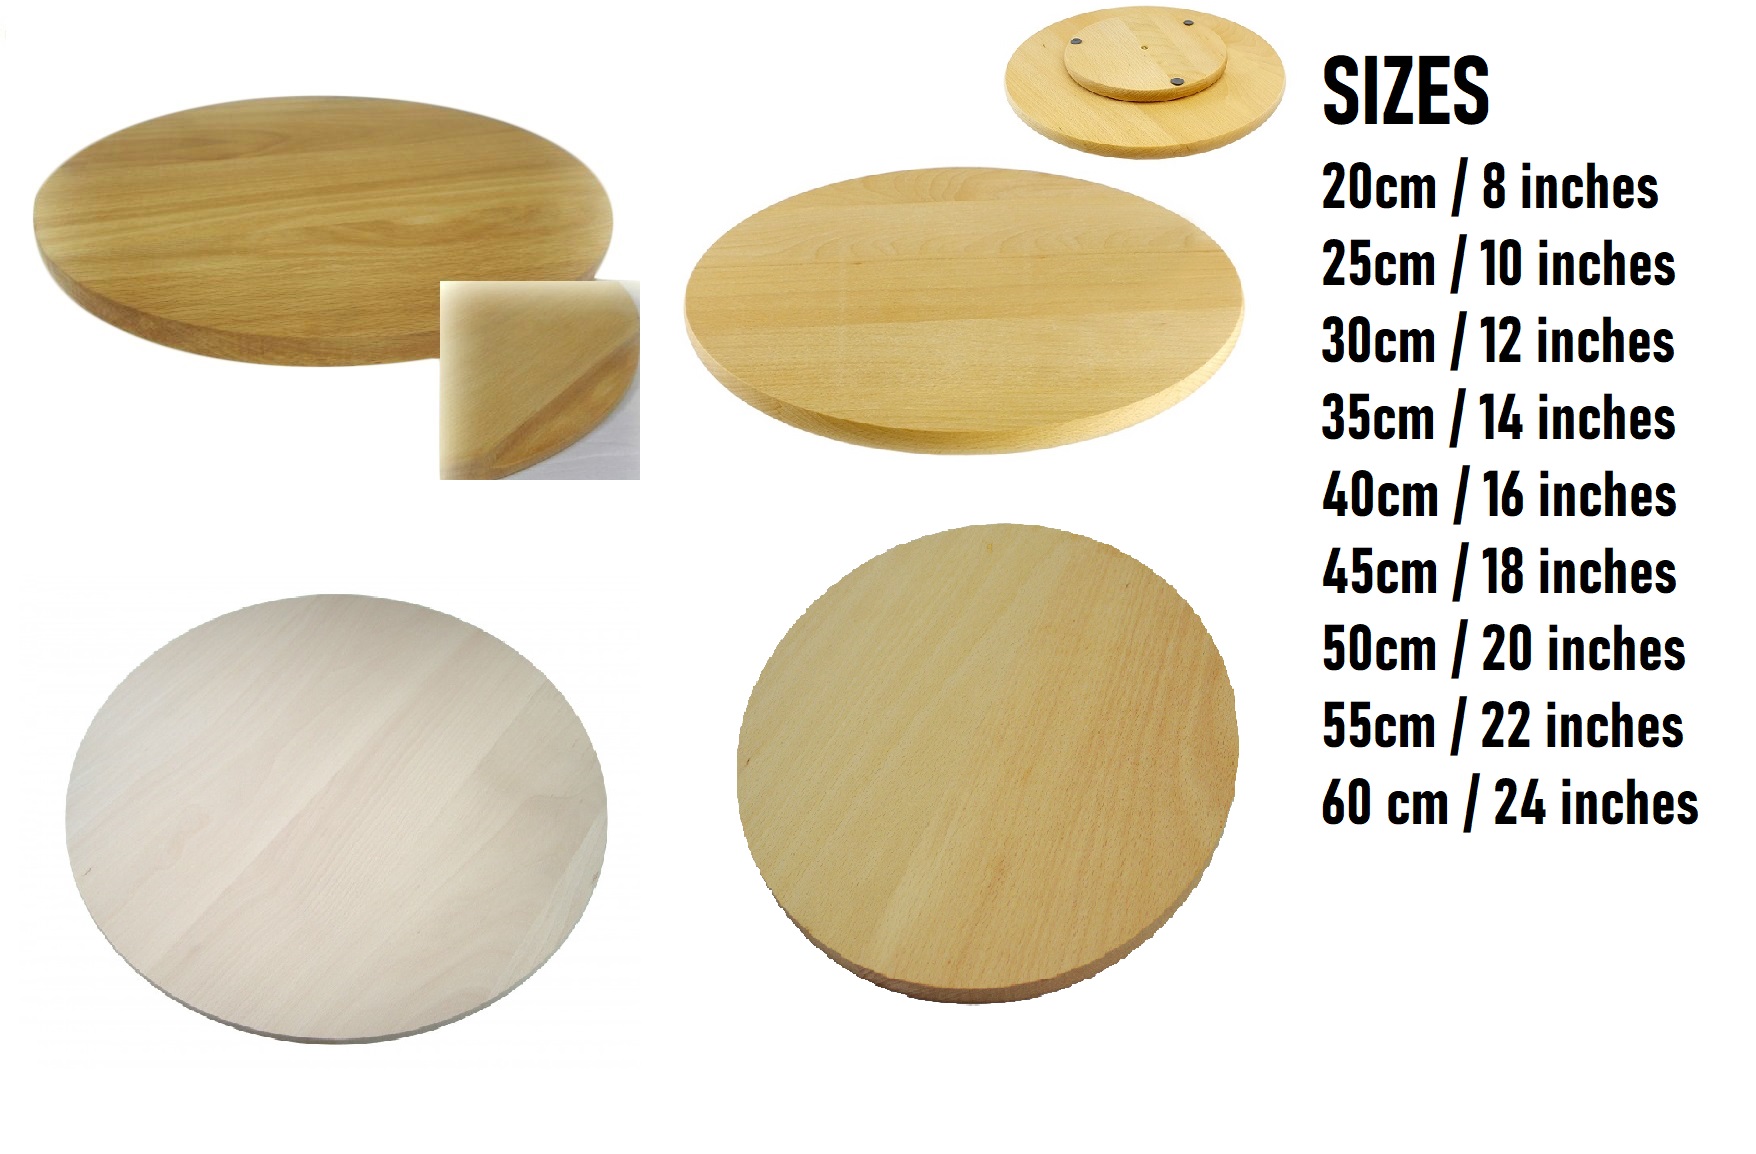 Premium Photo  Round wooden board for pizza on a beige background